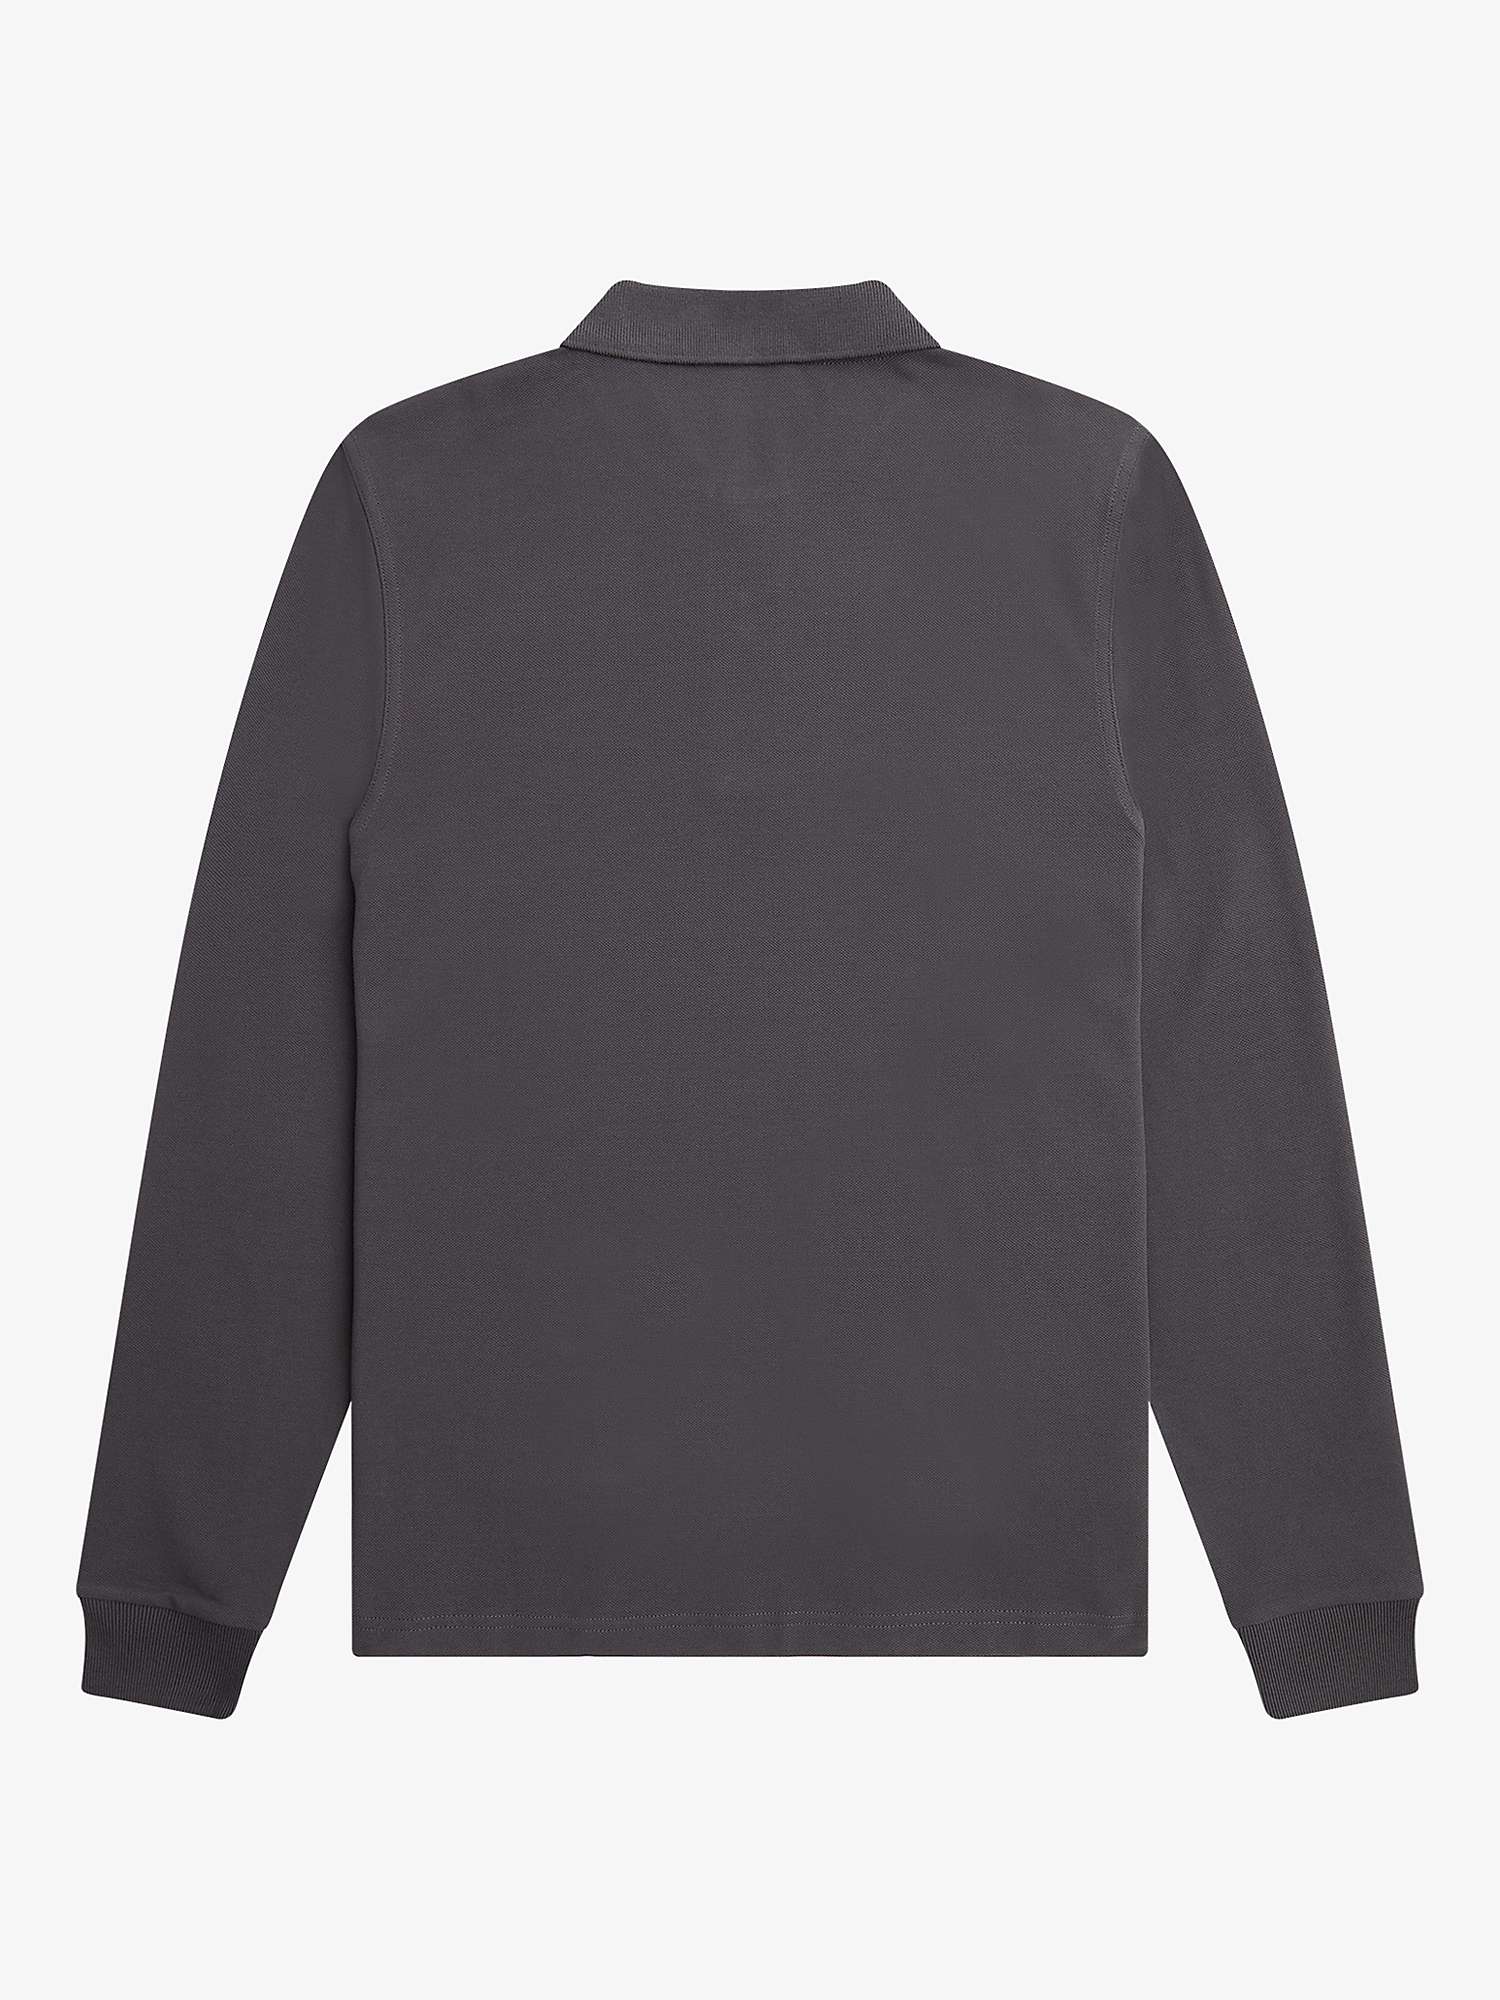 Fred Perry Long Sleeve Polo Top, G85 at John Lewis & Partners